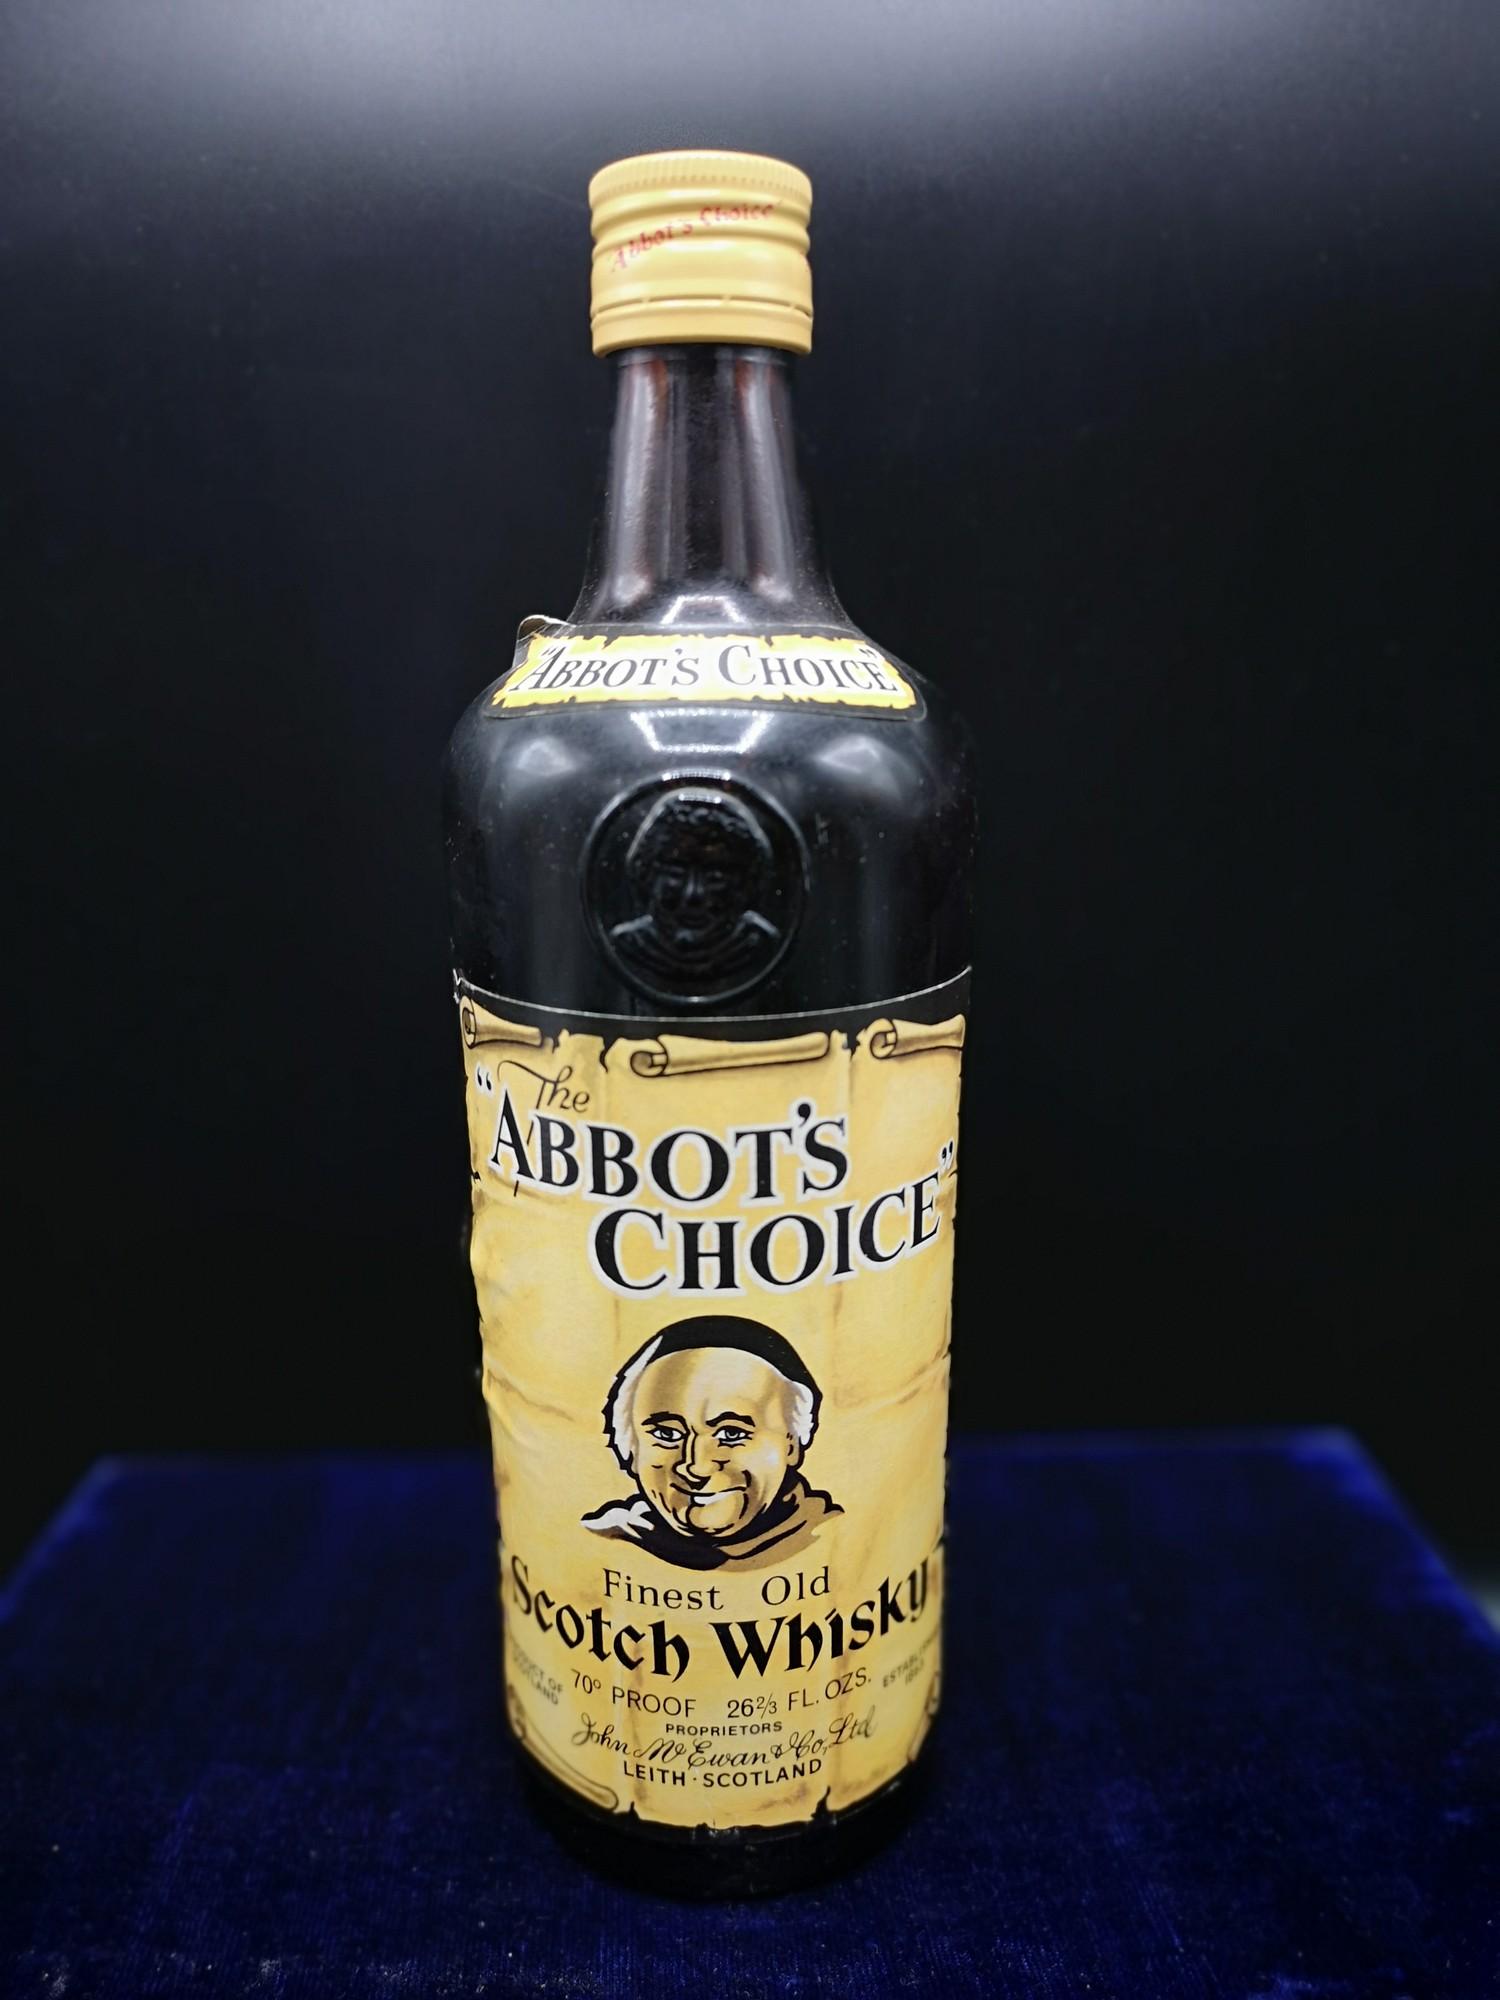 The abbot's choice finest old scotch whisky 70% proof, 26 2/3 fl ozs. Full and sealed.